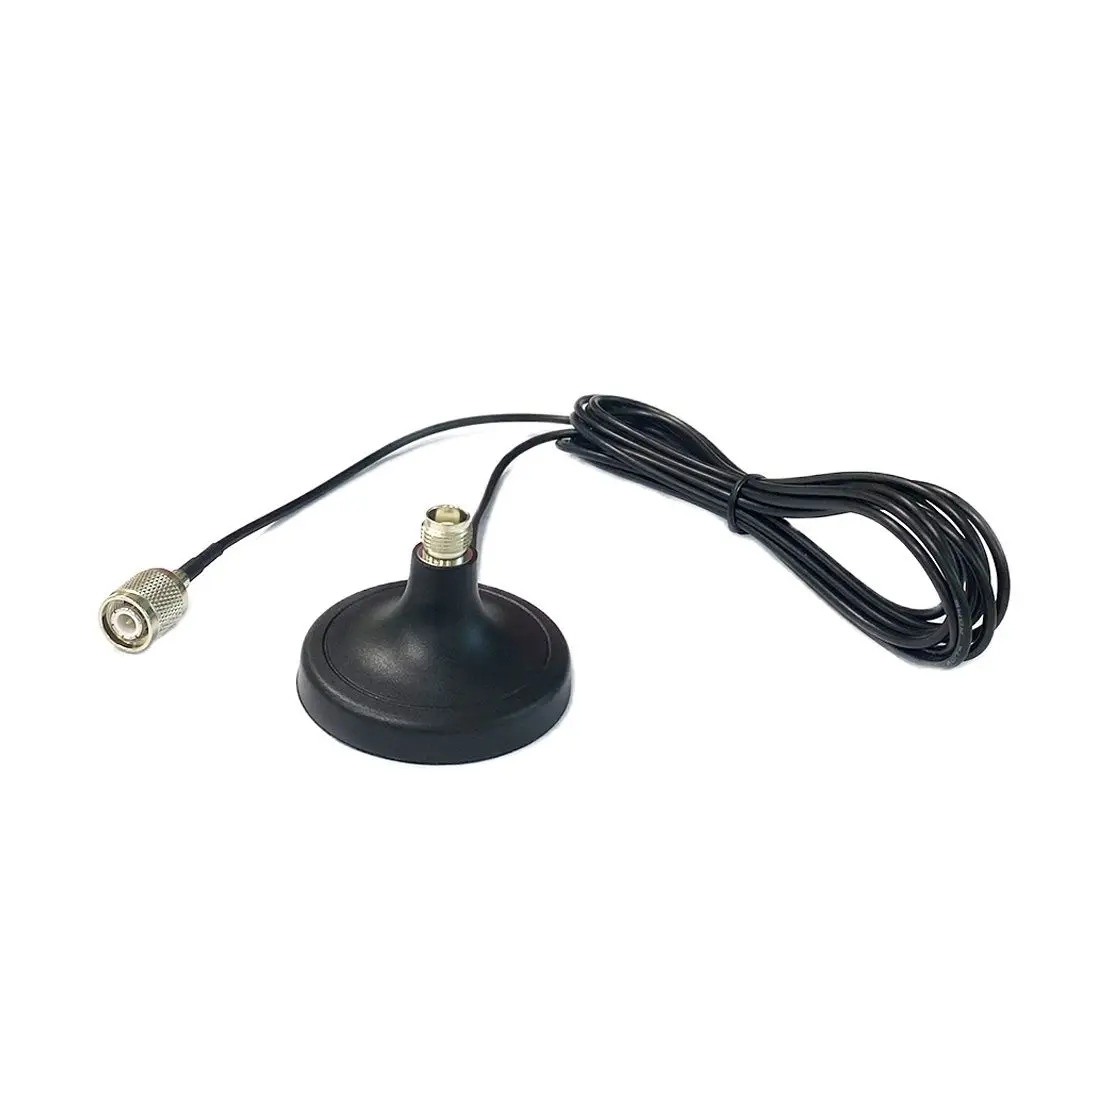 RF/RP TNC Microphone Antenna Base with Magnet 3m Cable for High Gain Antenna Aerial Base New